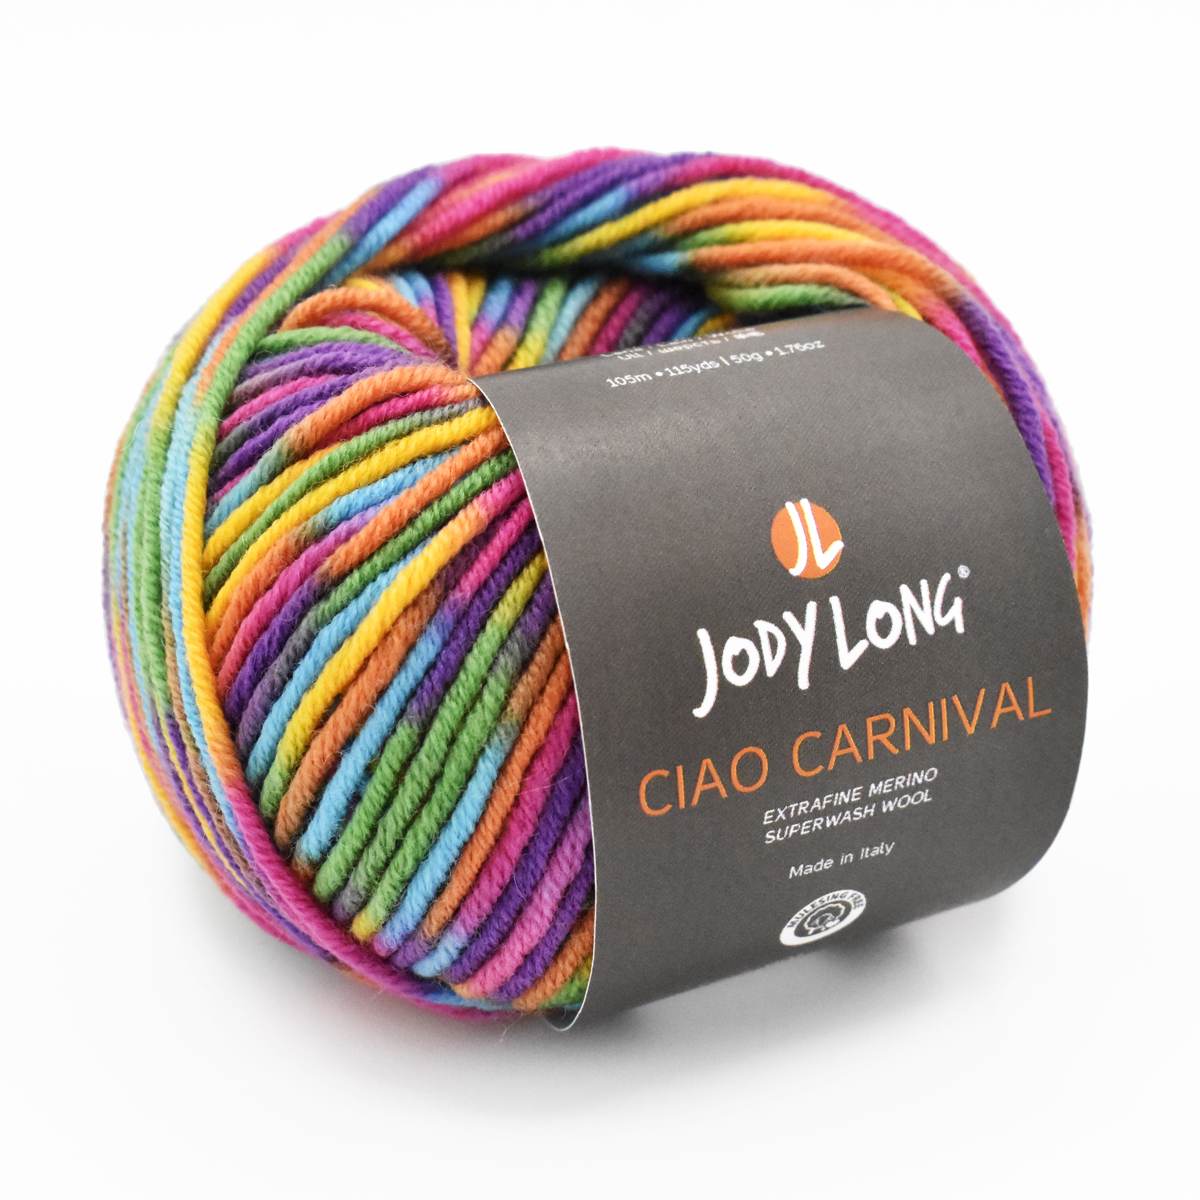 a skein of Ciao Carnival